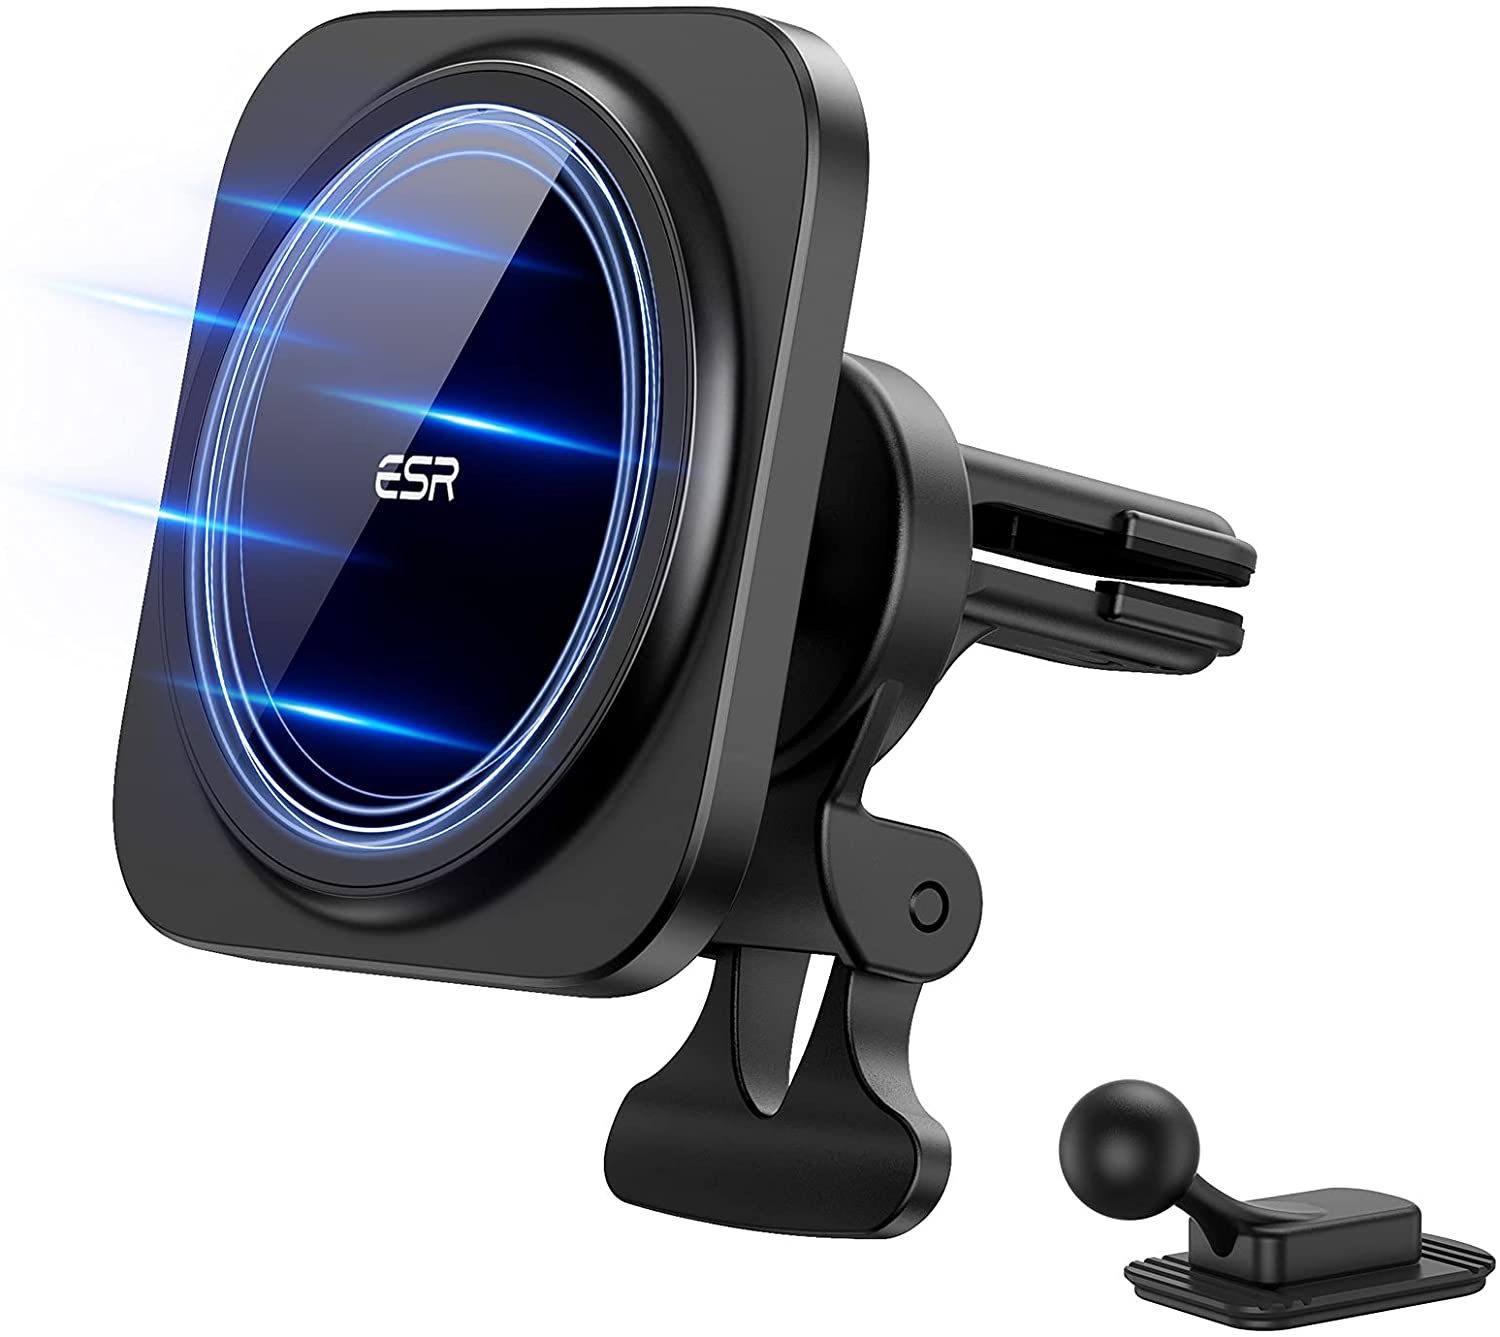 ESR HaloLock MagSafe Car Phone Mount Holder with Suction Cup and Air Vent Clip $13.29; MagSafe Chargers for iPhone 12 and Standard Wireless Chargers from $10.79 + FS with Prime